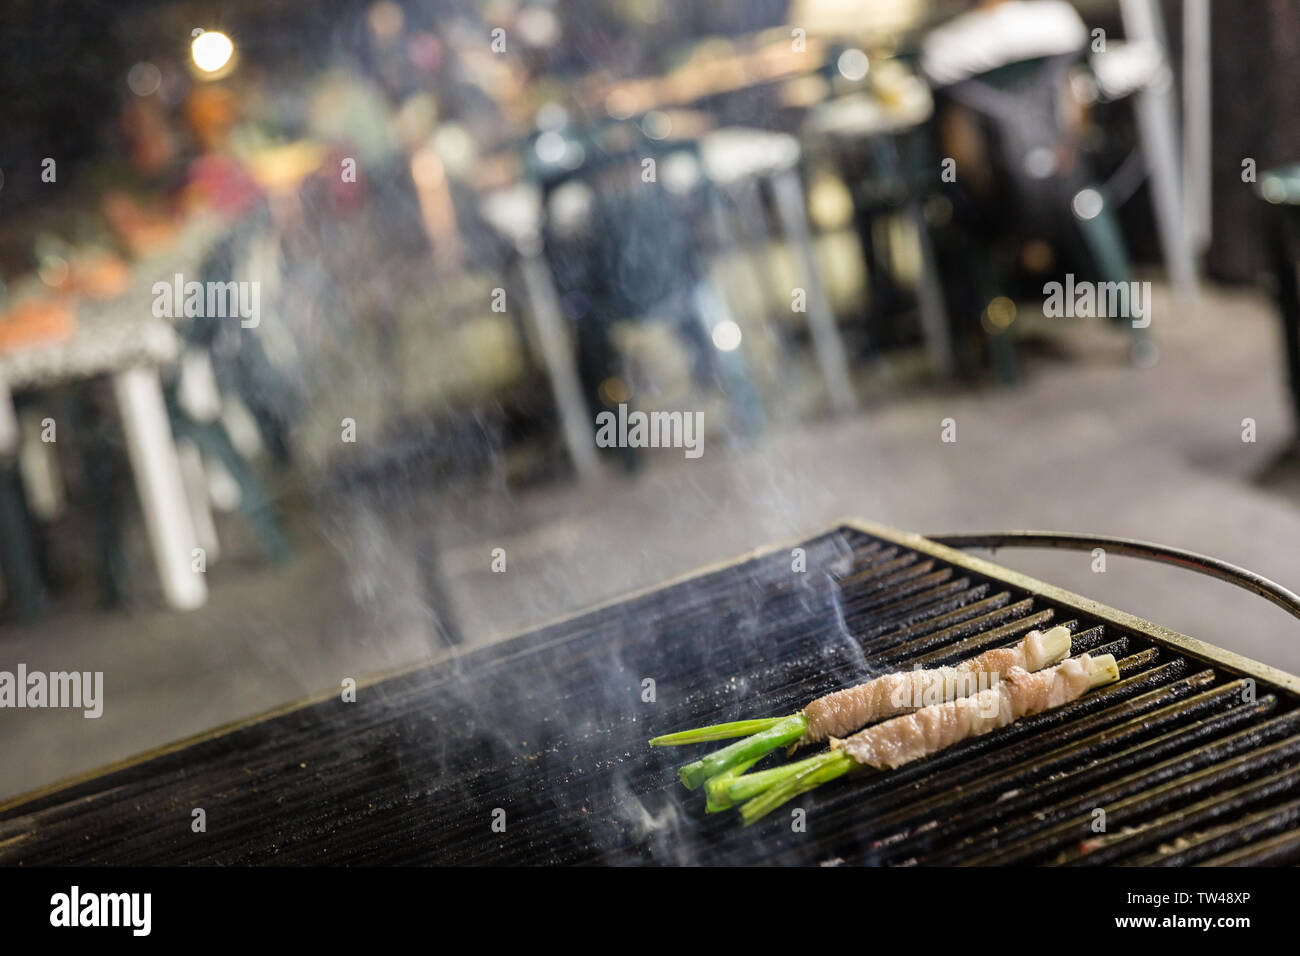 Mangia e bevi, typical Palermo street food. Bacon and chives on a grill Stock Photo